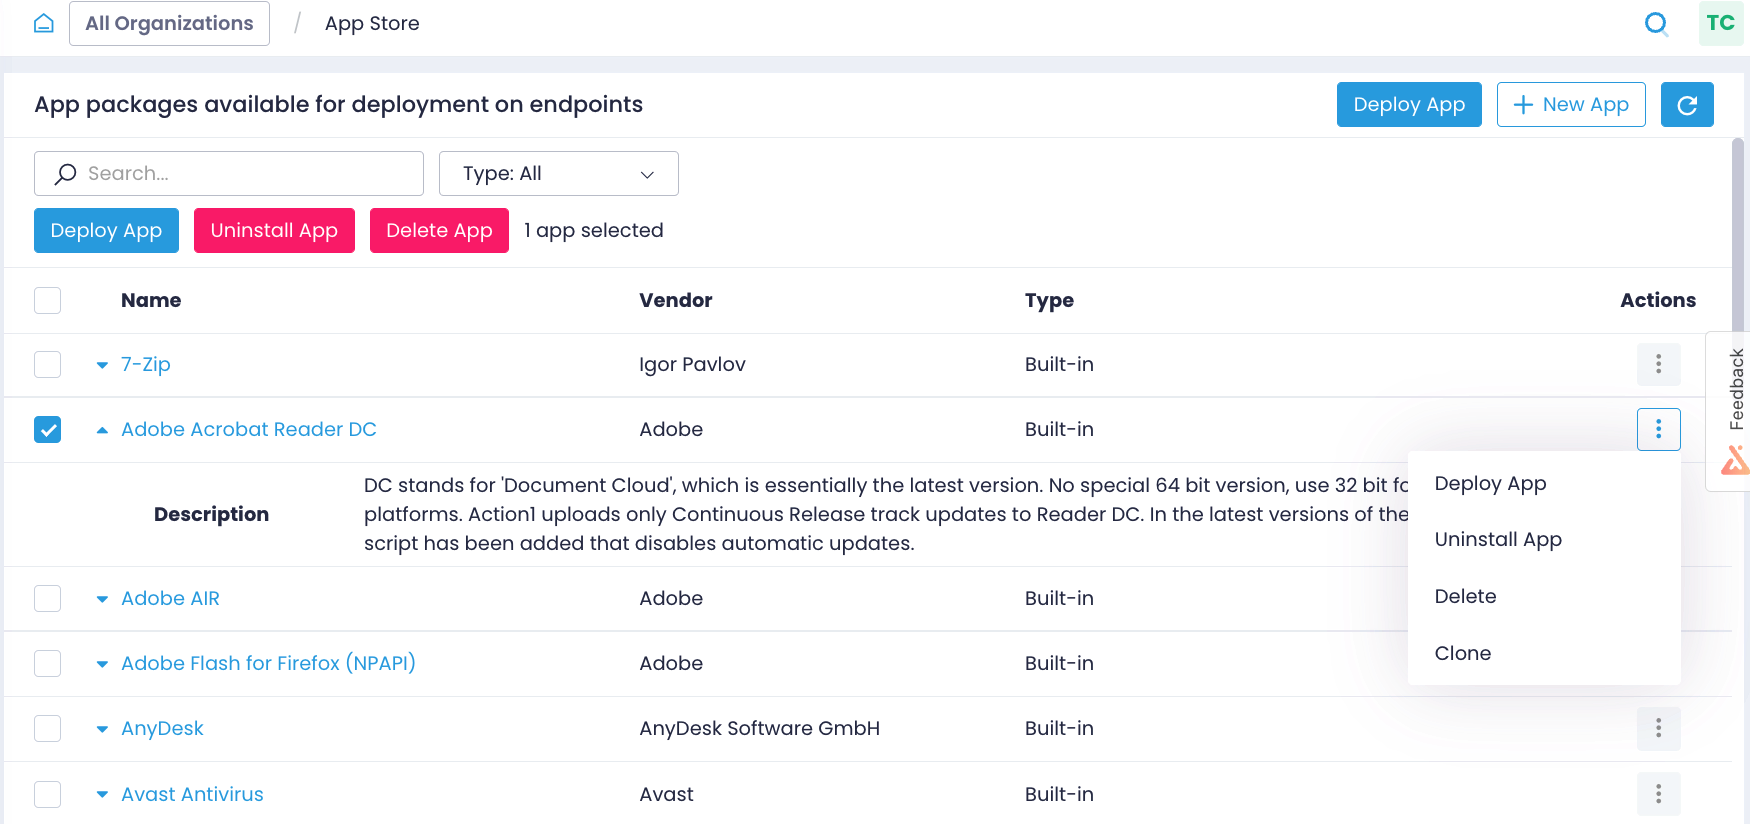 Explore well-curated App Store and deploy apps company-wide